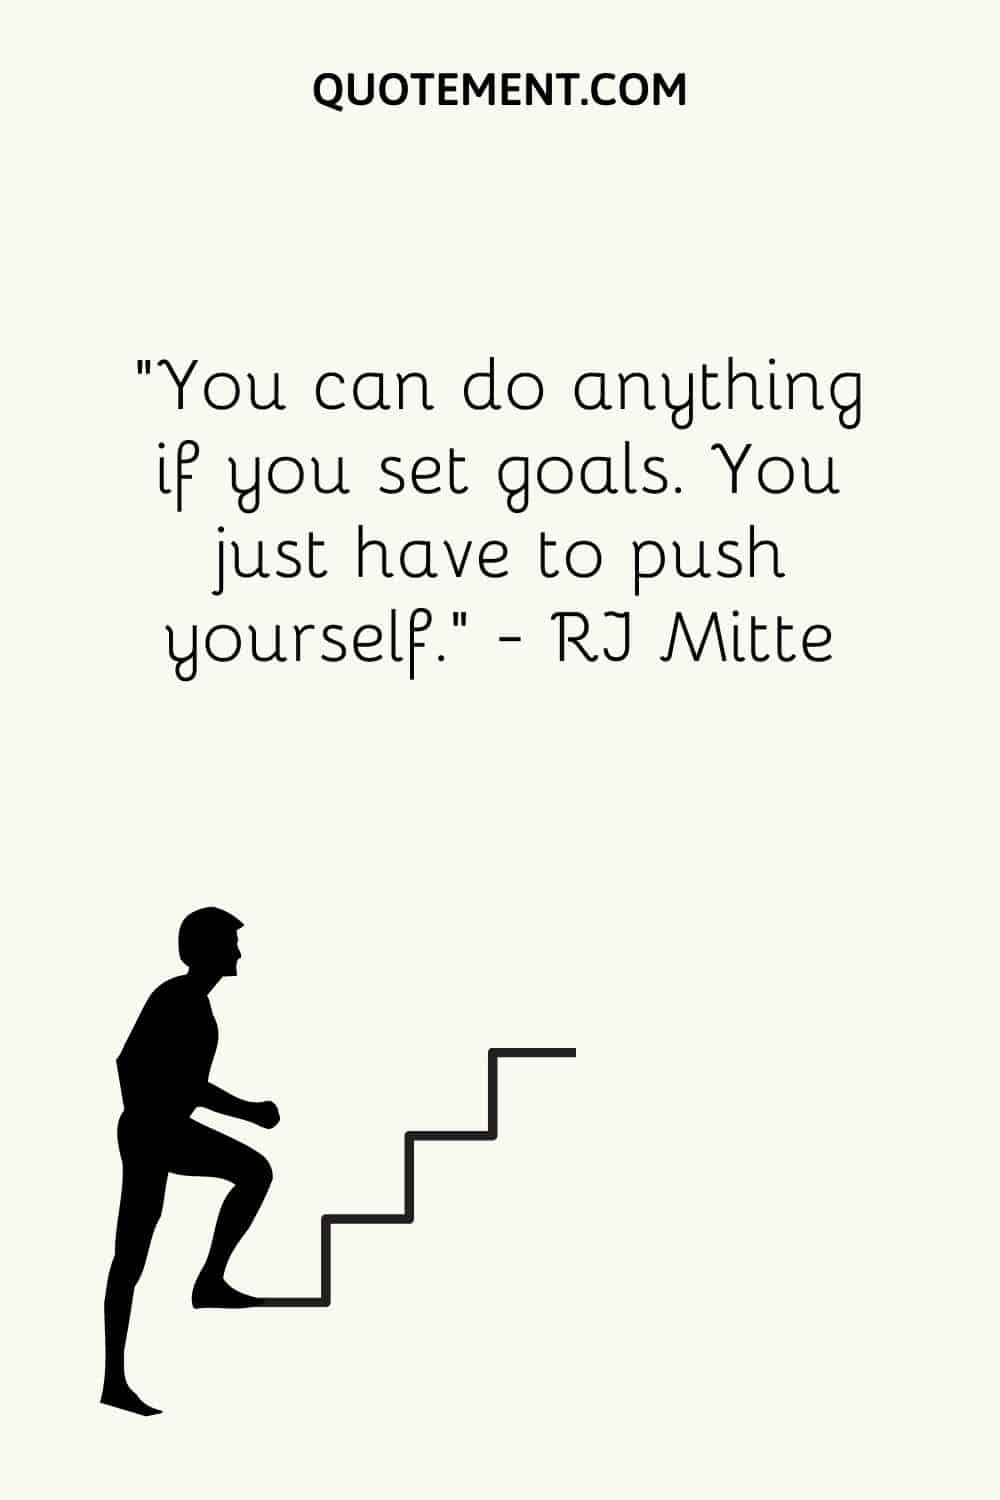 You can do anything if you set goals. You just have to push yourself